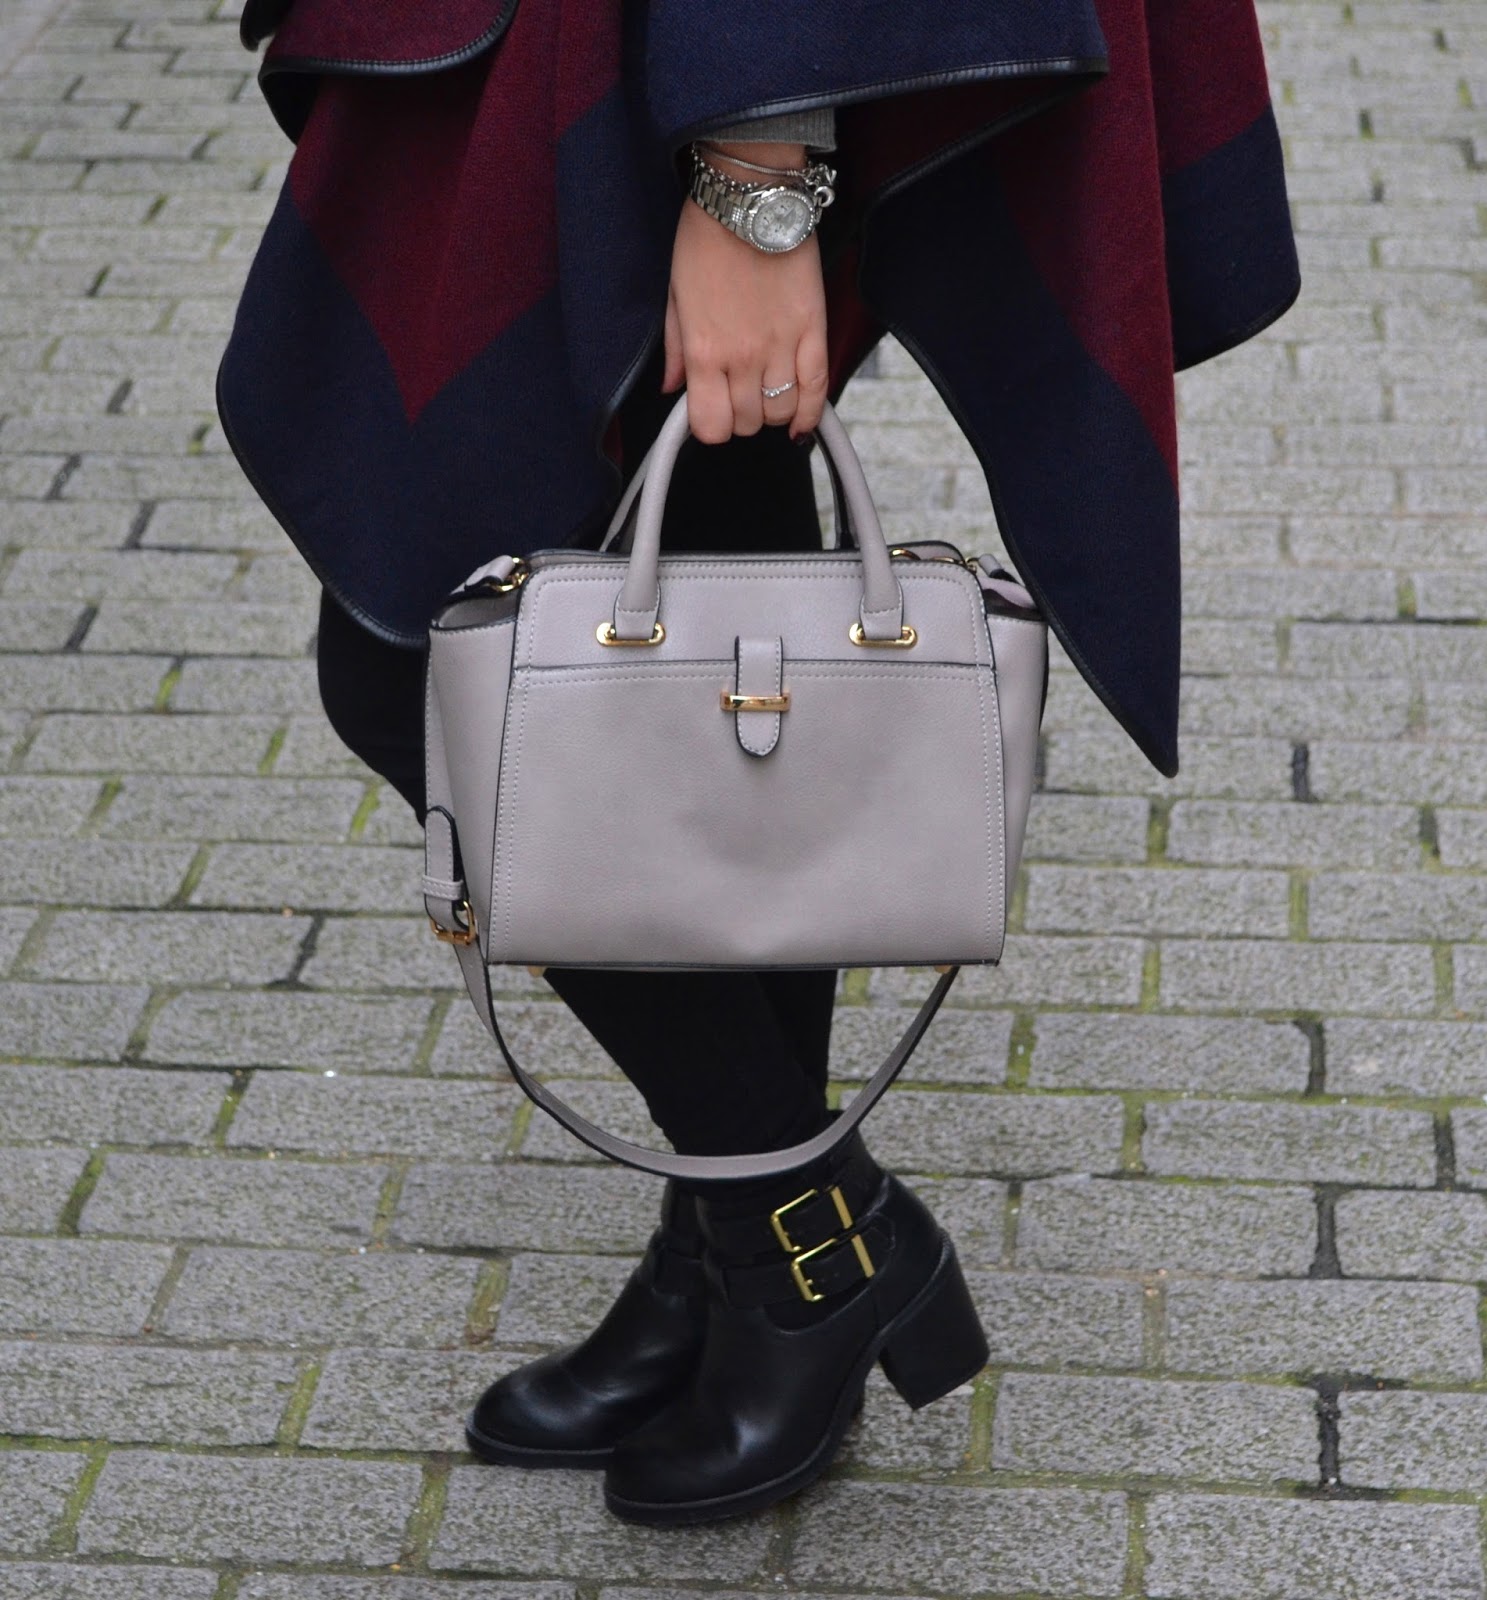 A/W 2015/16 Trends: The Grey Trend + GIVEAWAY! | Pam Scalfi♥